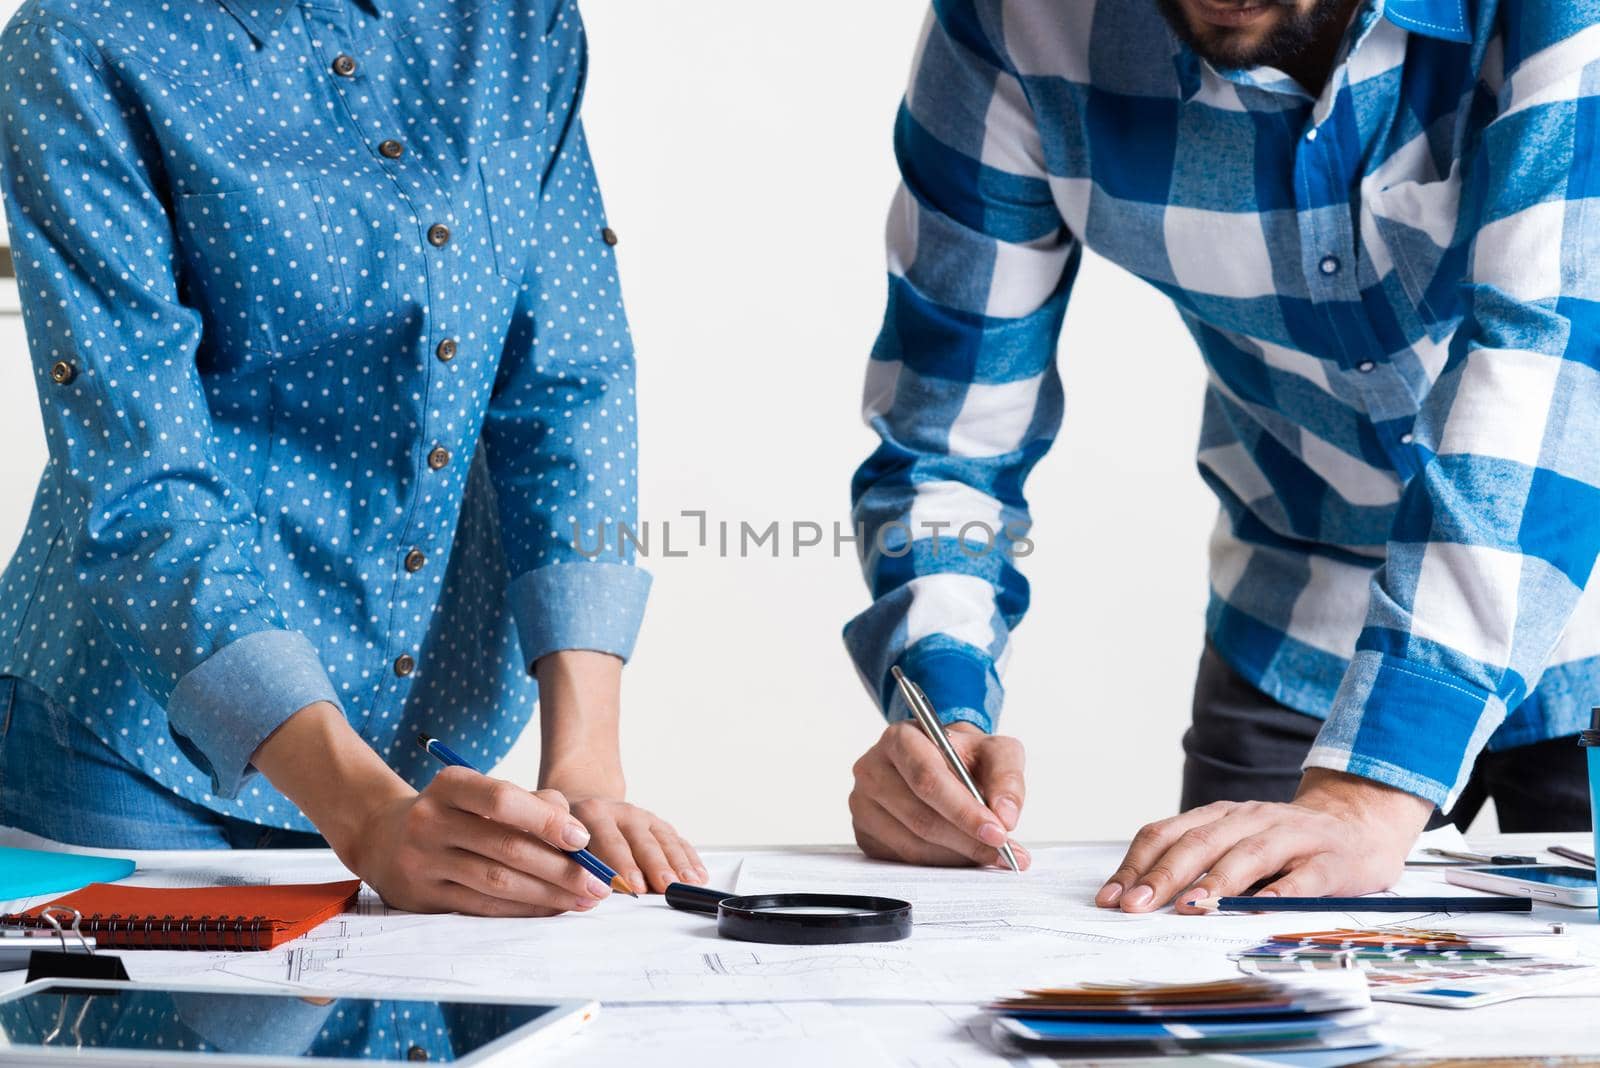 Man carefully studying technical drawing with magnifying glass. Designers working with color swatches and construction blueprint at workplace. Thorough analysis and inspection of design project.